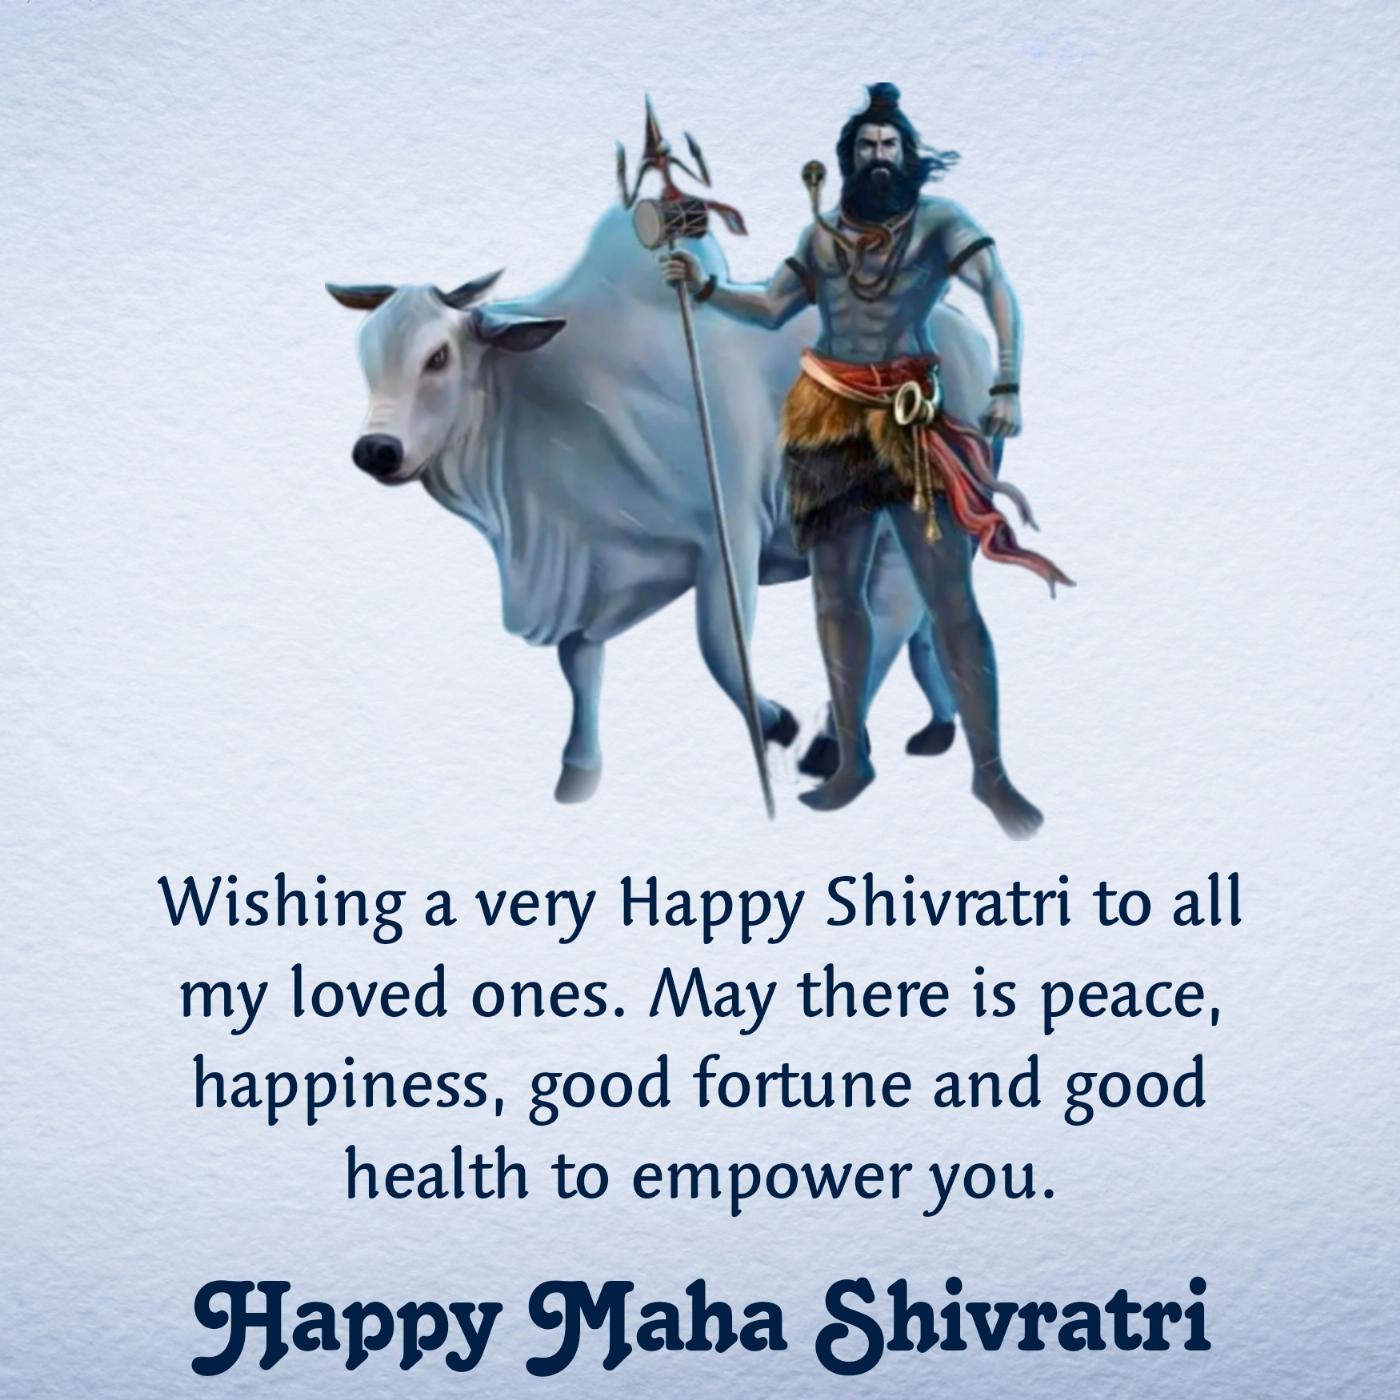 Wishing a very Happy Shivratri to all my loved ones